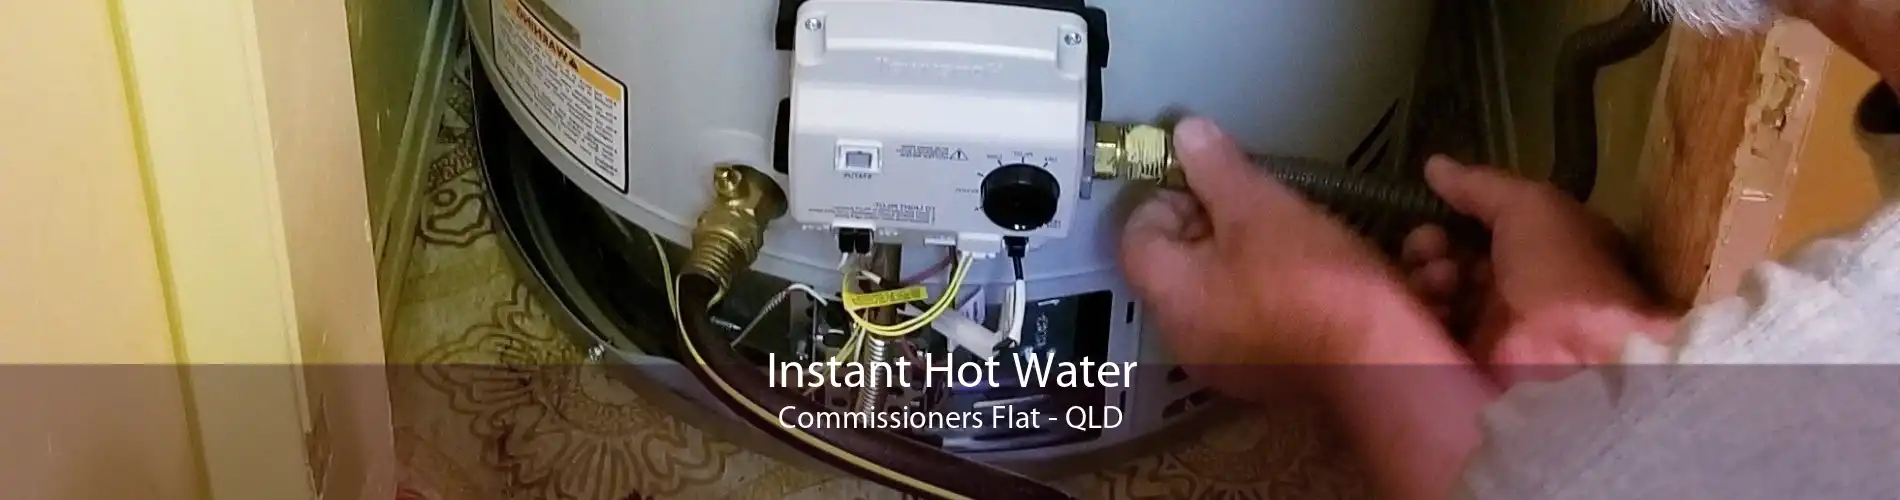 Instant Hot Water Commissioners Flat - QLD